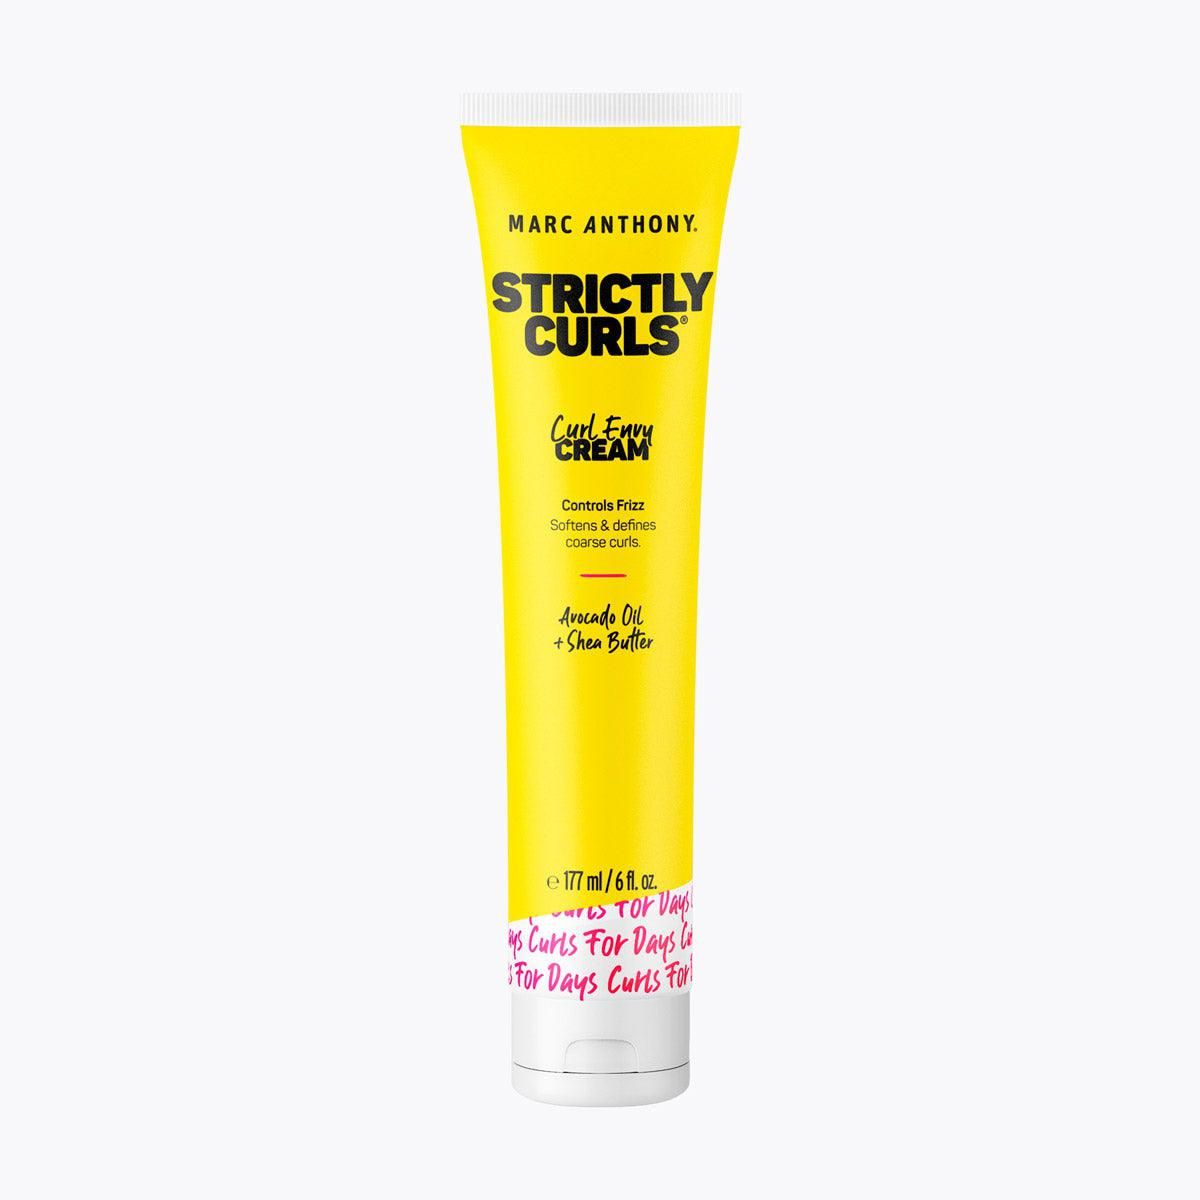 Strictly Curls Curl Envy Perfect Curl Cream